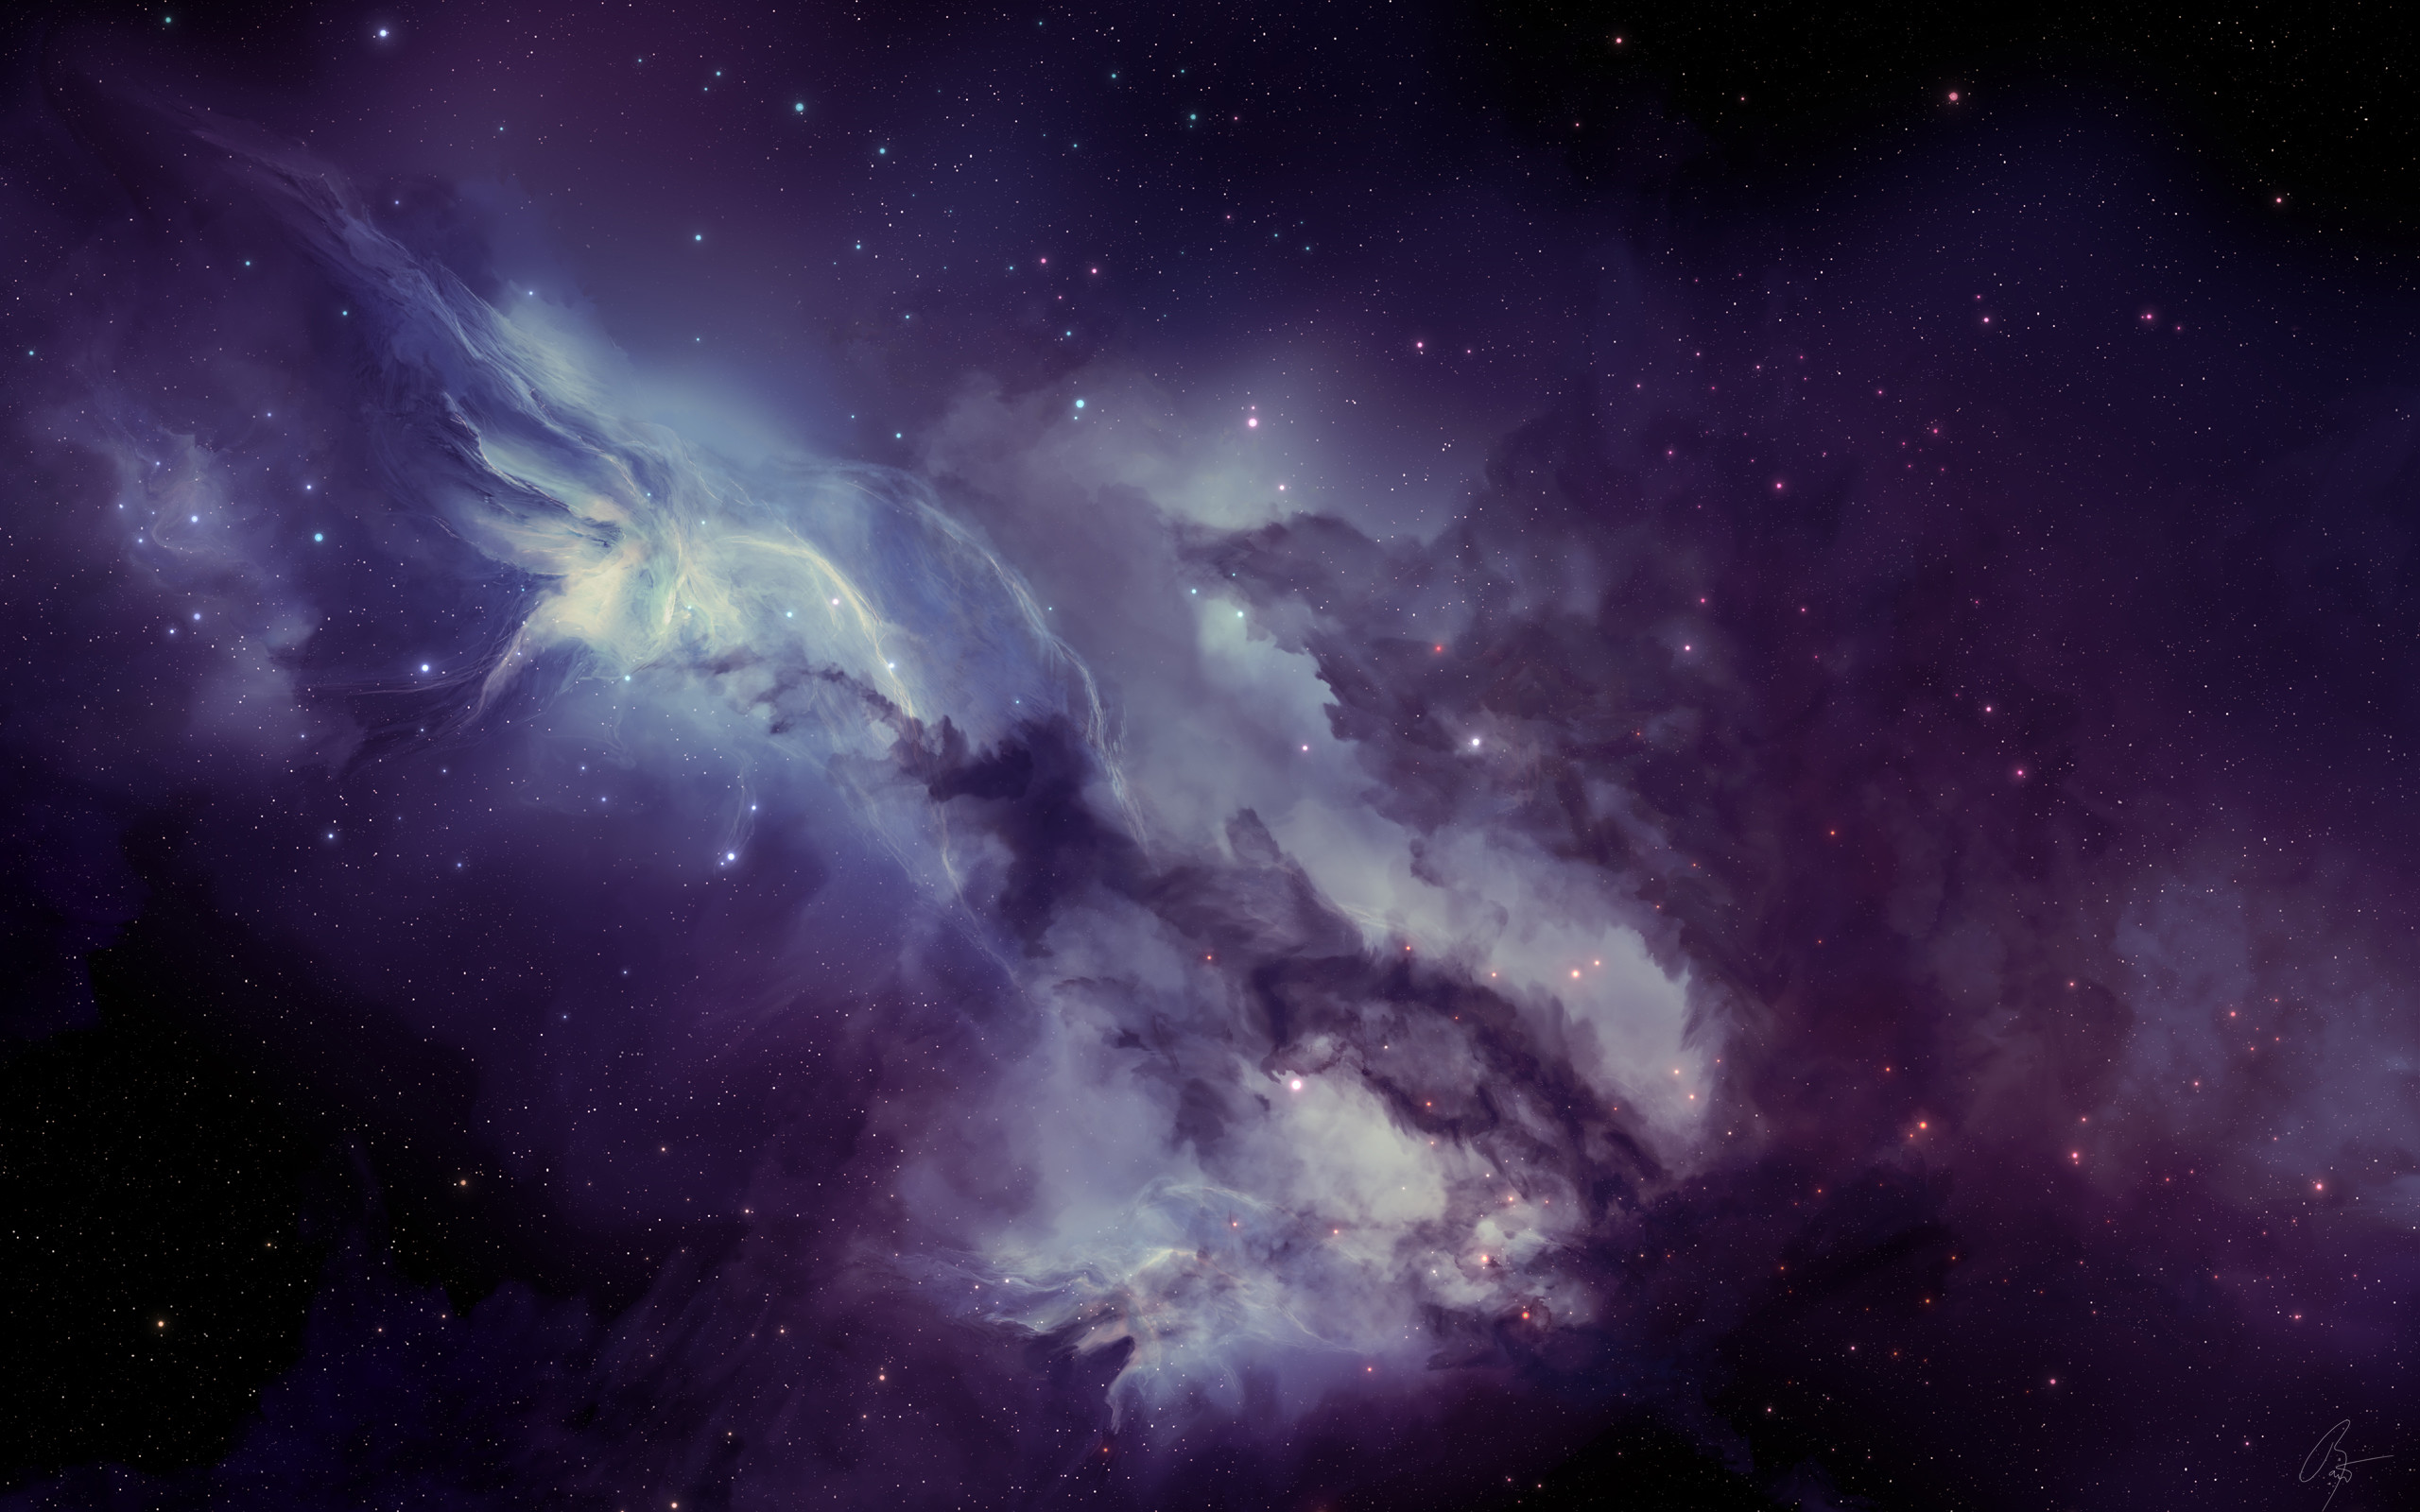 Purple Galaxy Backgrounds For Desktop Wallpaper 2560 X 1600 Px 1 2 Mb Cross Iphone Quotes Nebula 2560x1600